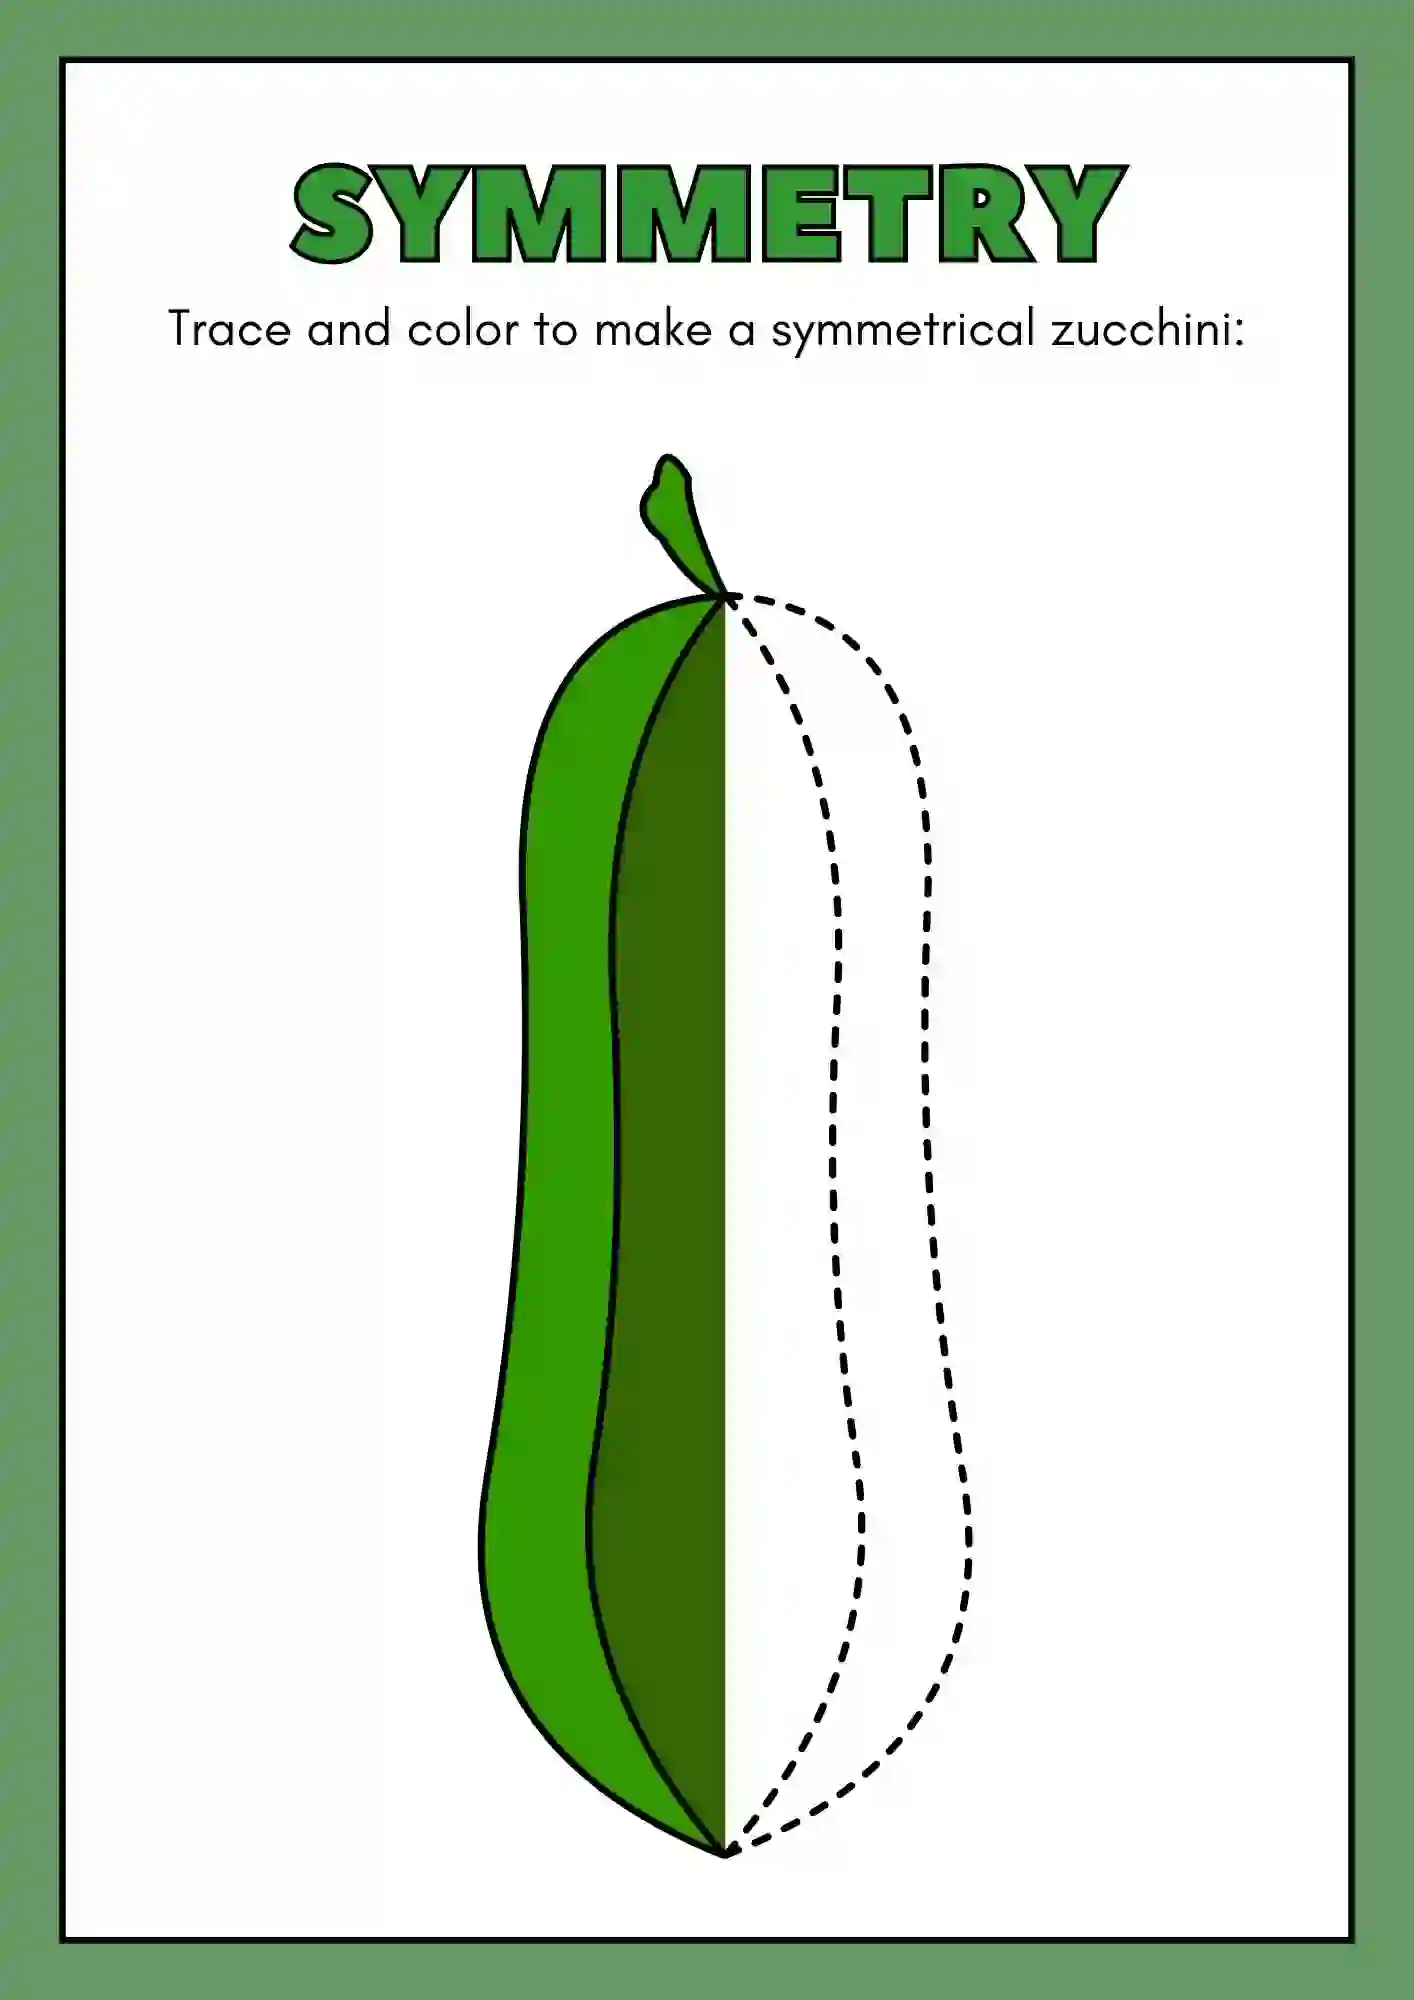 Symmetric Drawing and Coloring worksheets (cucumber)